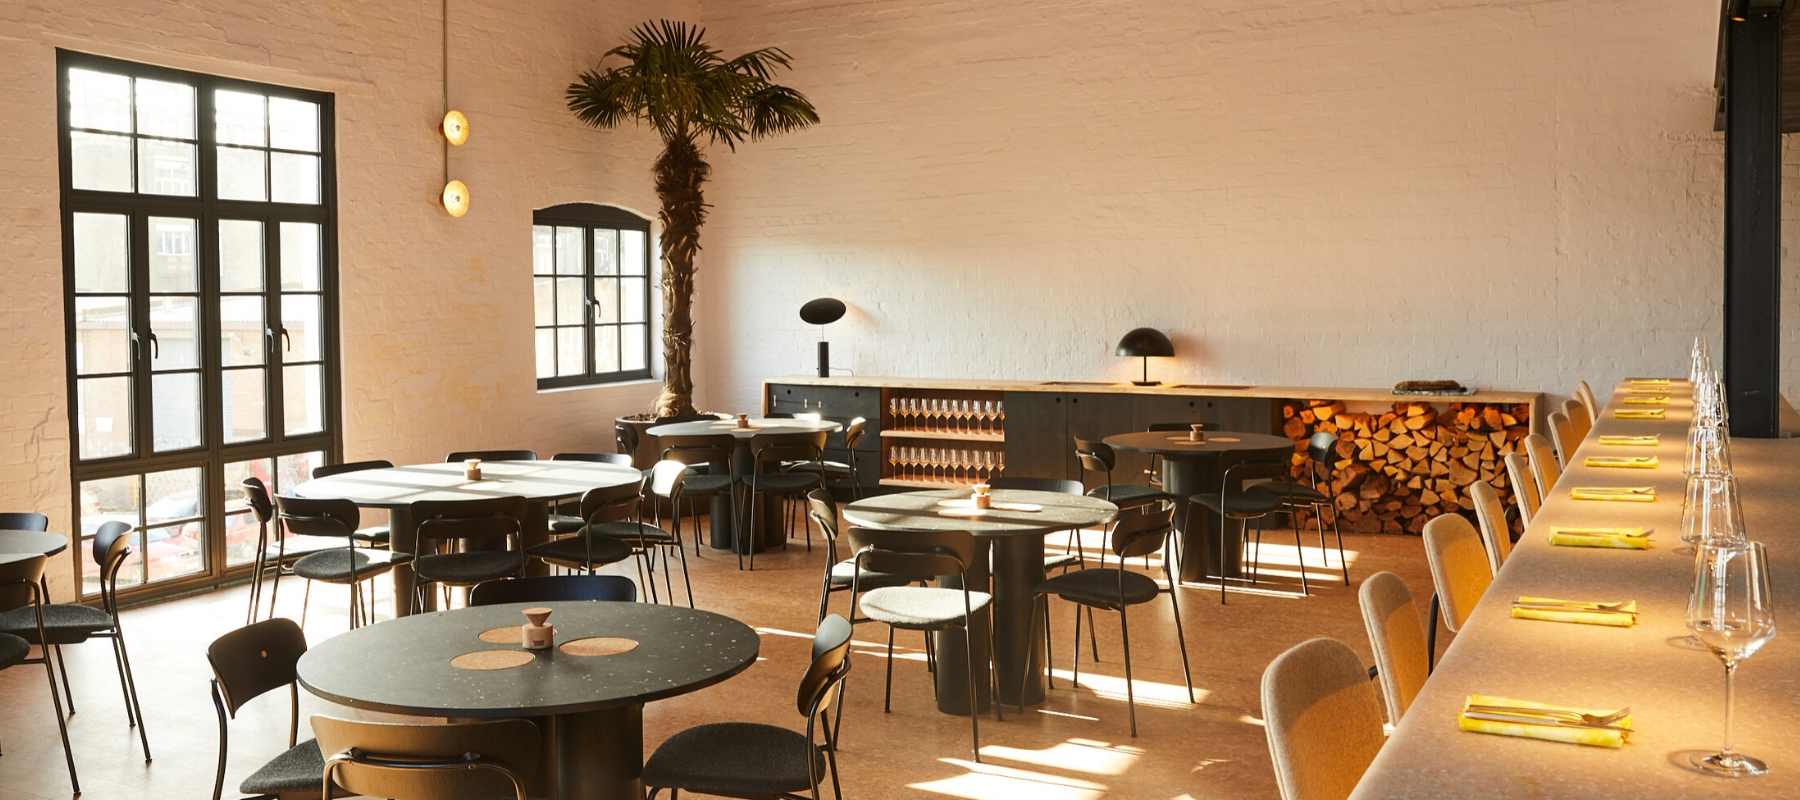 Main restaurant room at Silo London featuring tall windows and palm tree